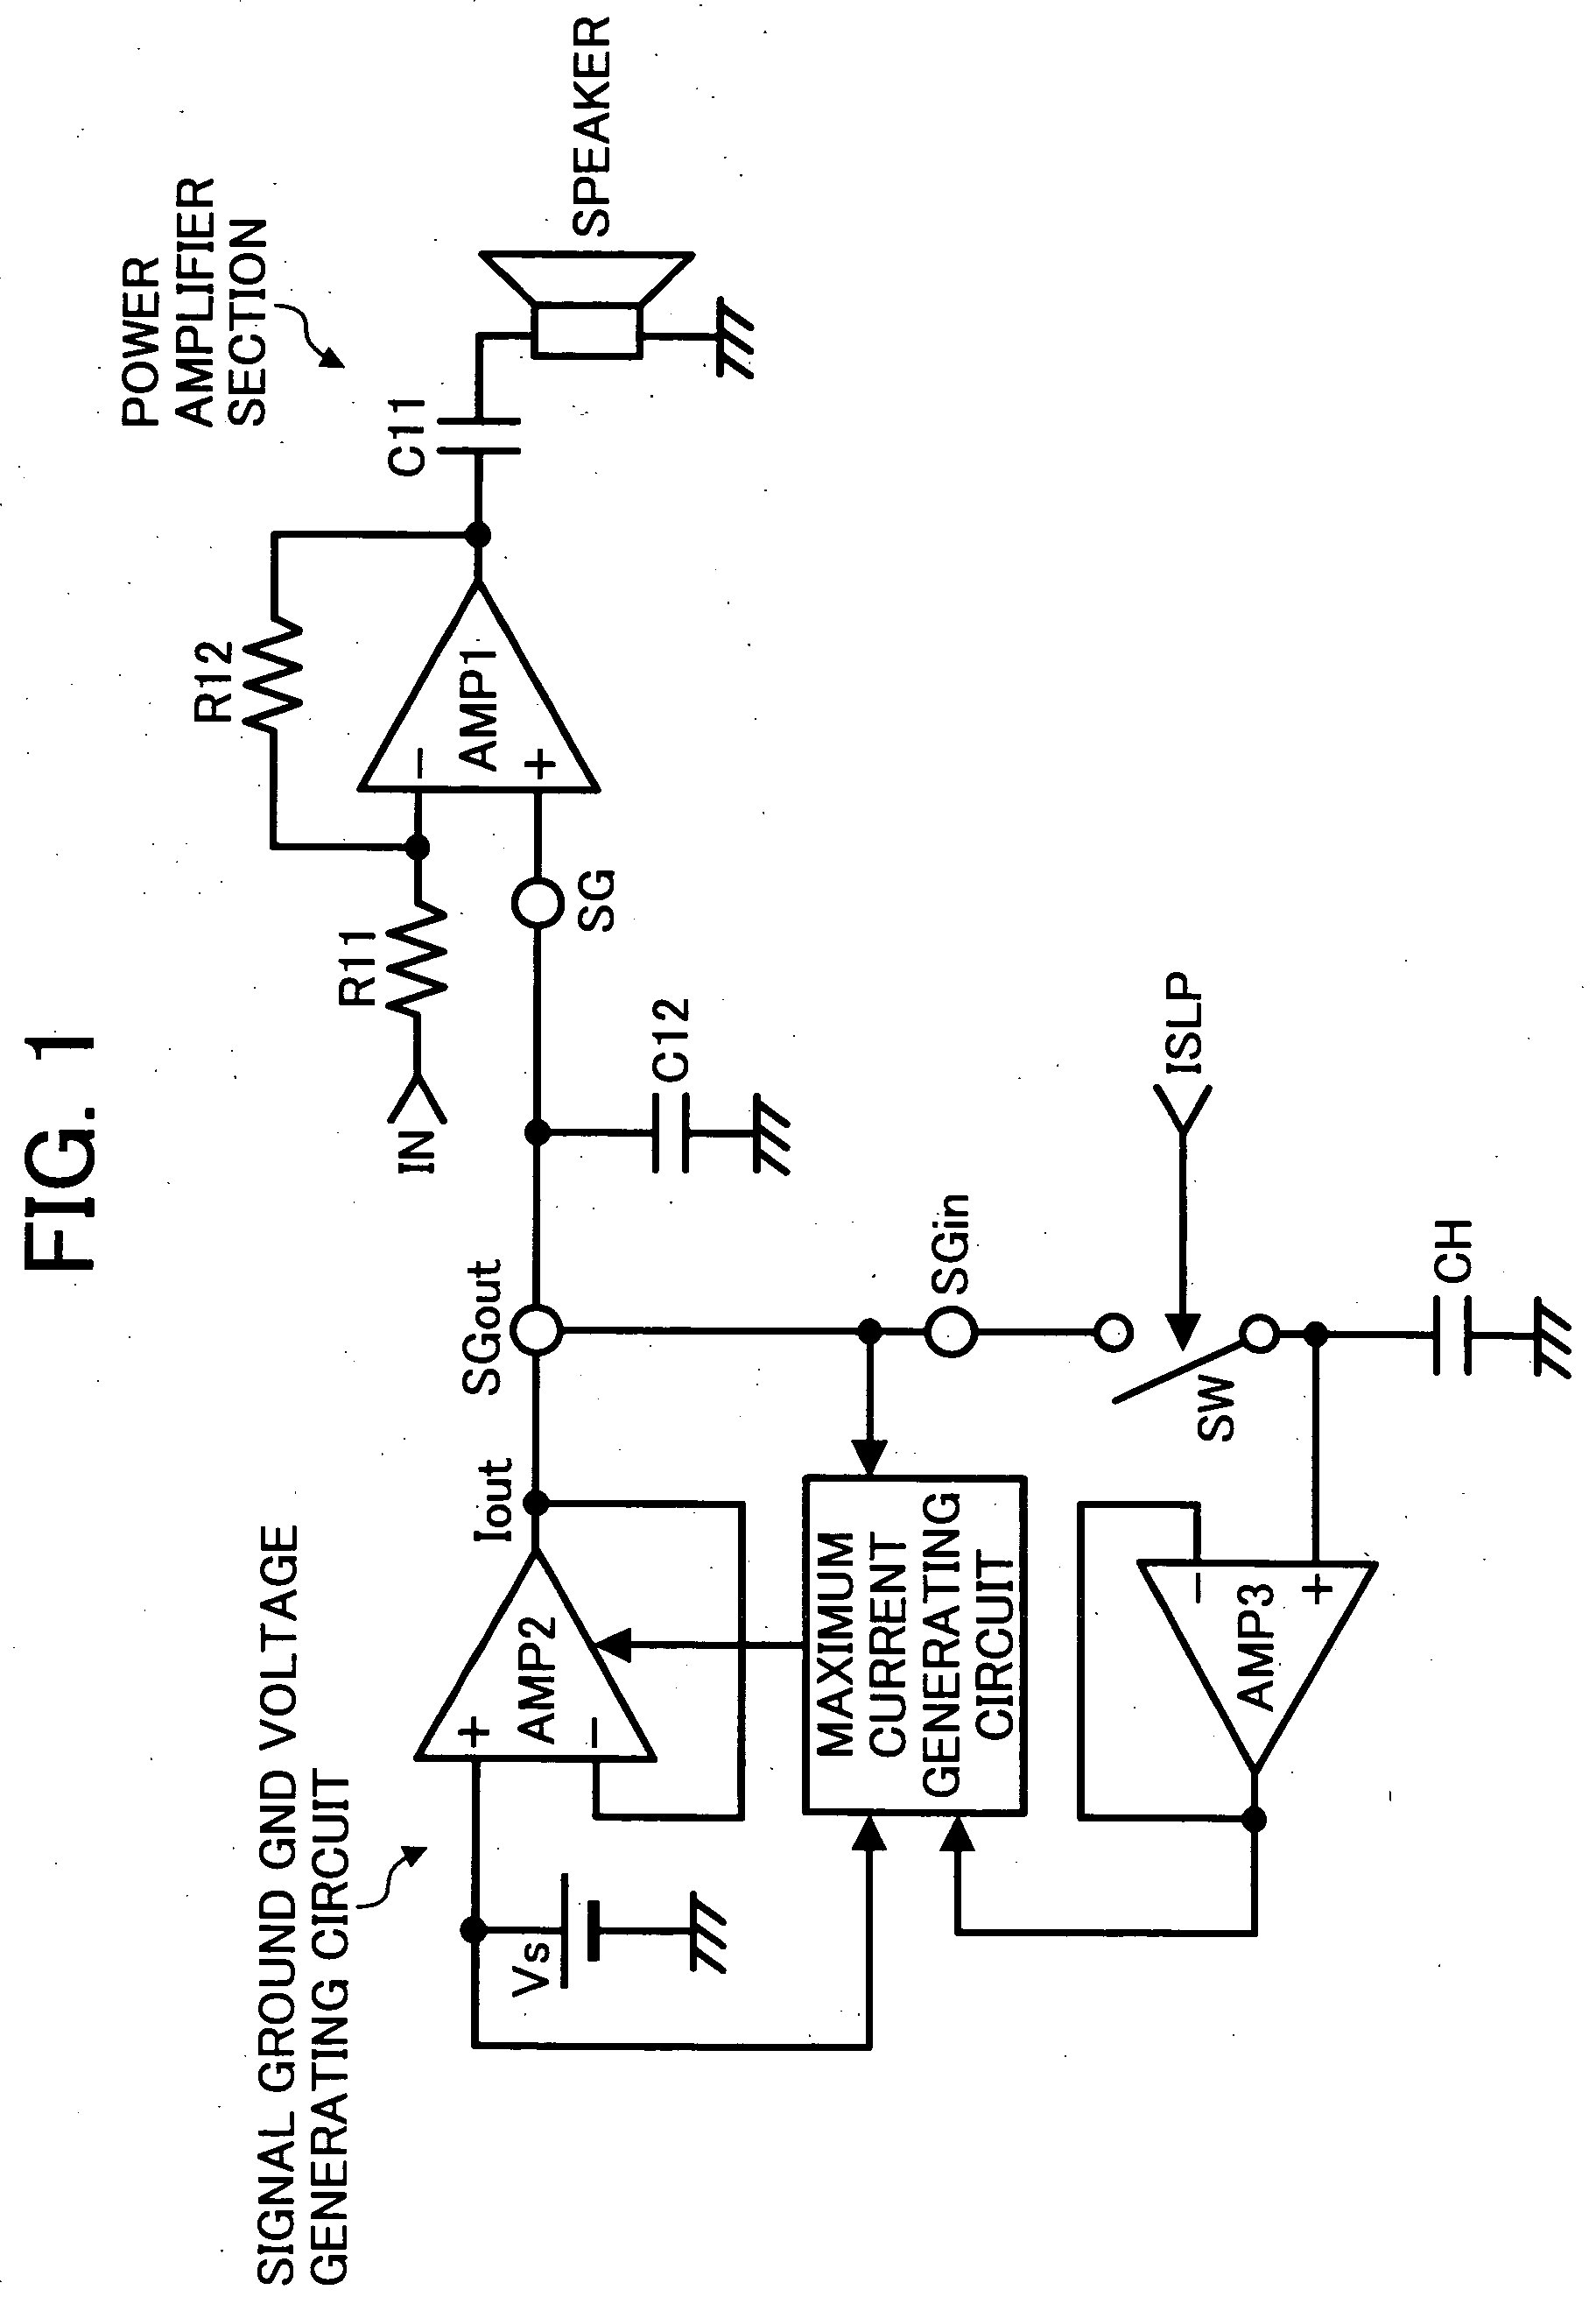 System, circuit, and amplifier for reducing pop sound